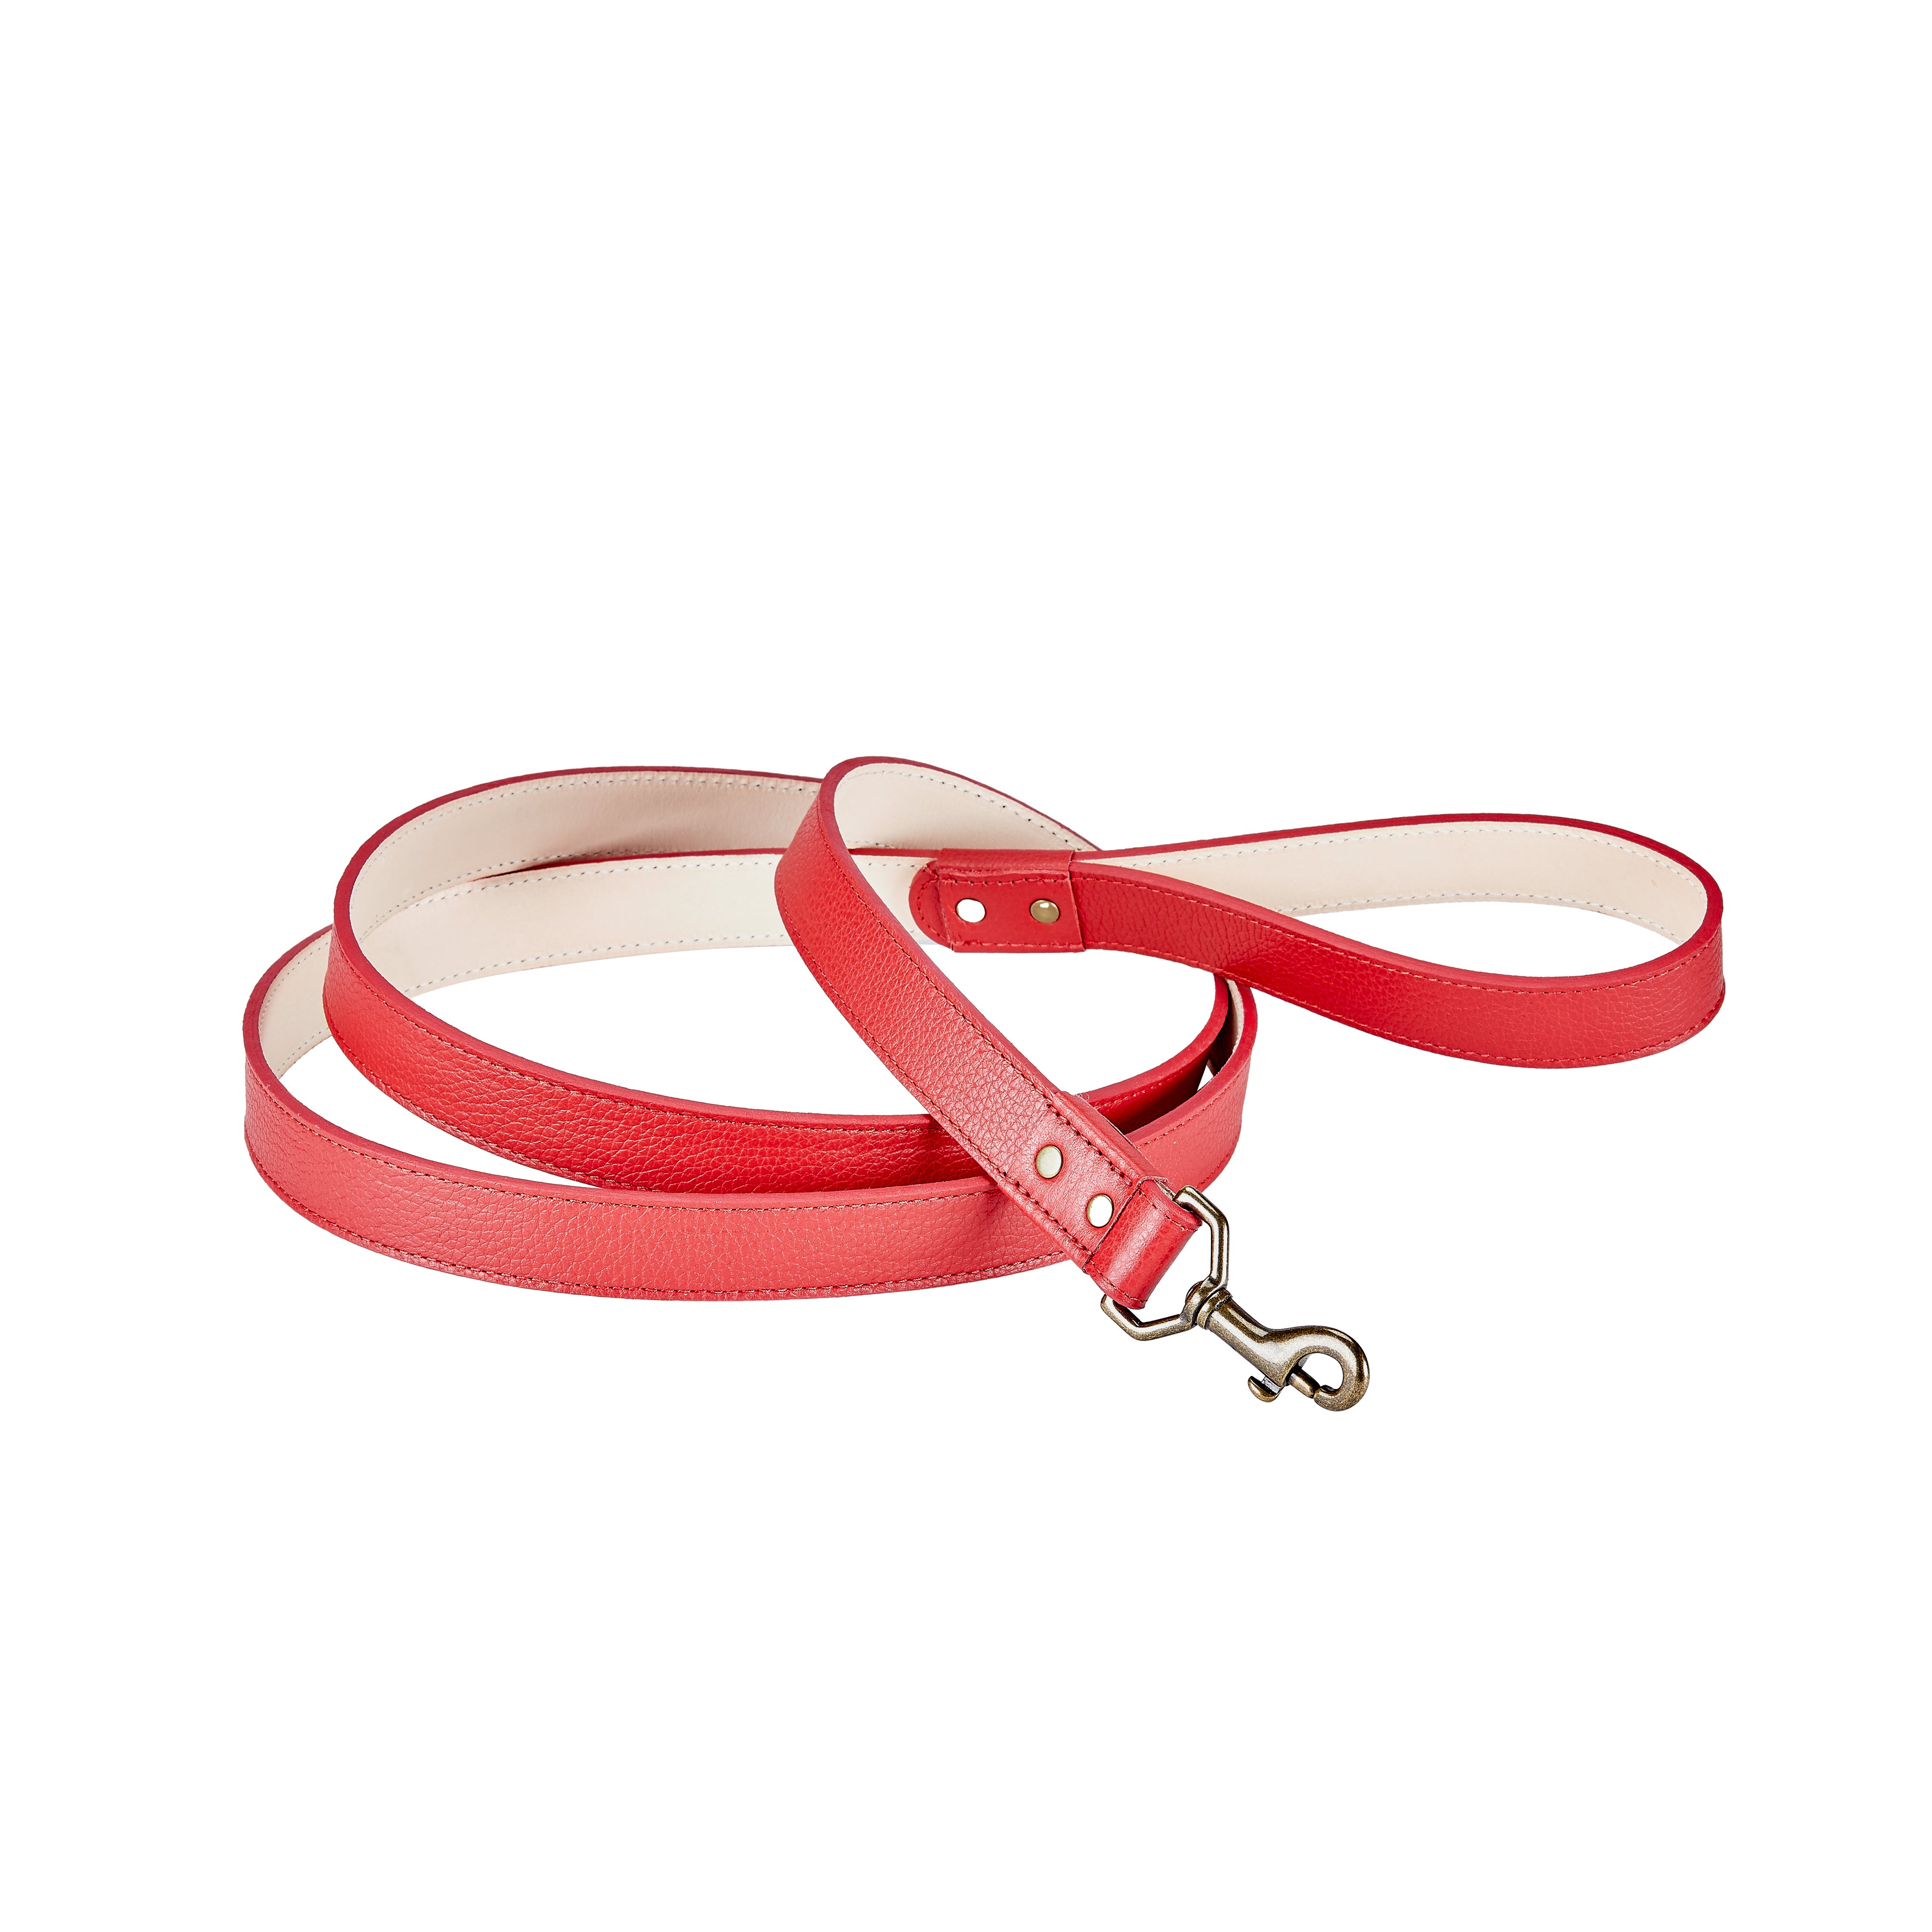 Graphic Image 4 Feet Dog Leash Red Pebble Grain Leather